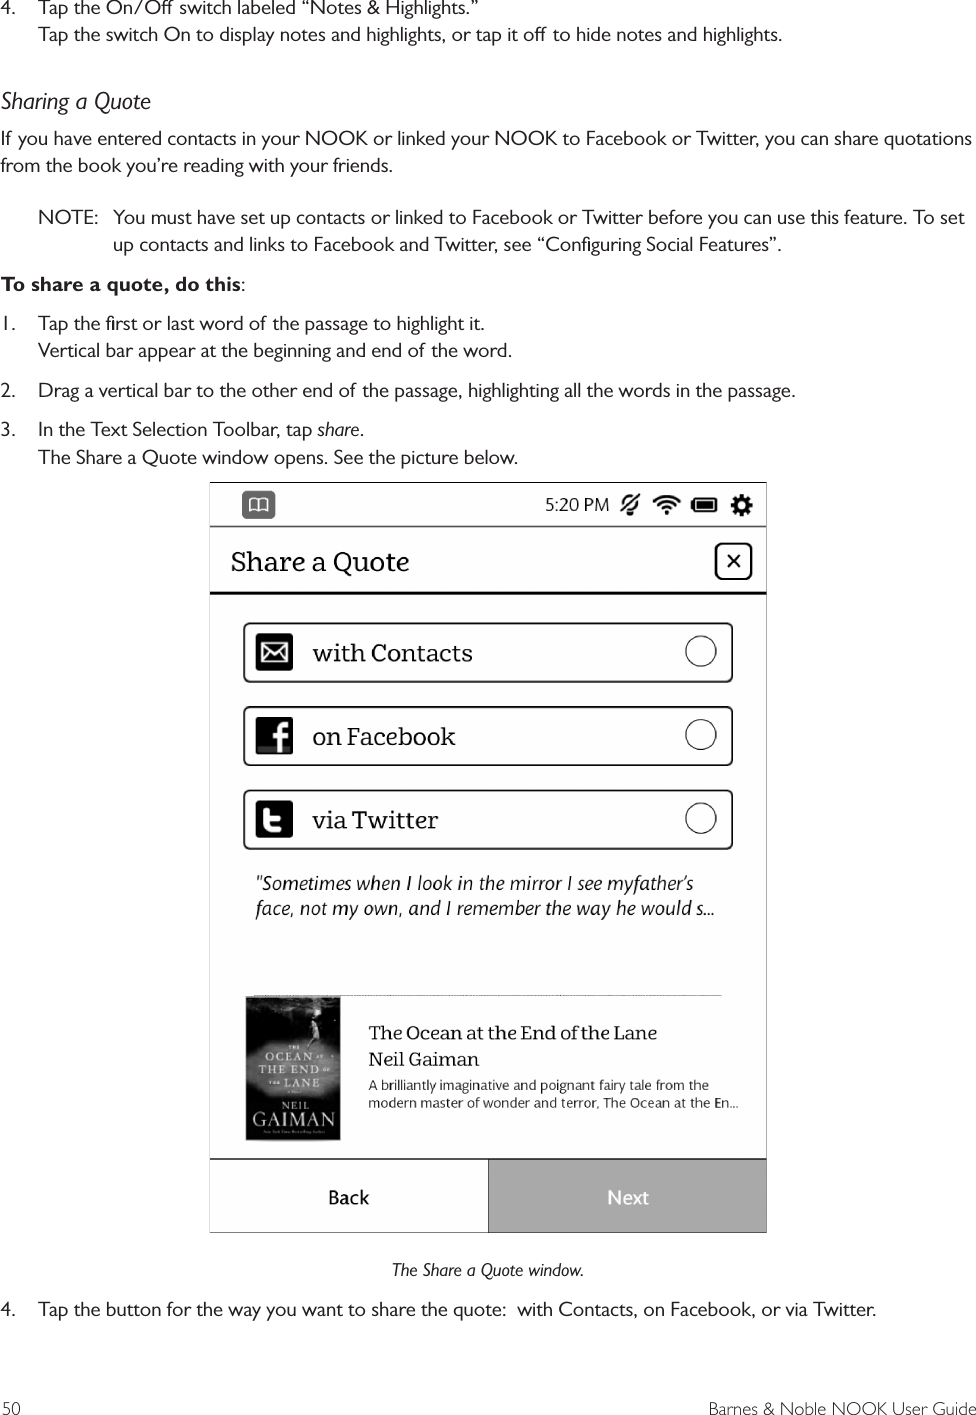 50  Barnes &amp; Noble NOOK User Guide4.  Tap the On/O switch labeled “Notes &amp; Highlights.” Tap the switch On to display notes and highlights, or tap it o to hide notes and highlights.Sharing a QuoteIf you have entered contacts in your NOOK or linked your NOOK to Facebook or Twitter, you can share quotations from the book you’re reading with your friends.NOTE:  You must have set up contacts or linked to Facebook or Twitter before you can use this feature. To set up contacts and links to Facebook and Twitter, see “Conﬁguring Social Features”. To share a quote, do this:1.  Tap the ﬁrst or last word of the passage to highlight it. Vertical bar appear at the beginning and end of the word.2.  Drag a vertical bar to the other end of the passage, highlighting all the words in the passage.3.  In the Text Selection Toolbar, tap share. The Share a Quote window opens. See the picture below.The Share a Quote window.4.  Tap the button for the way you want to share the quote:  with Contacts, on Facebook, or via Twitter.